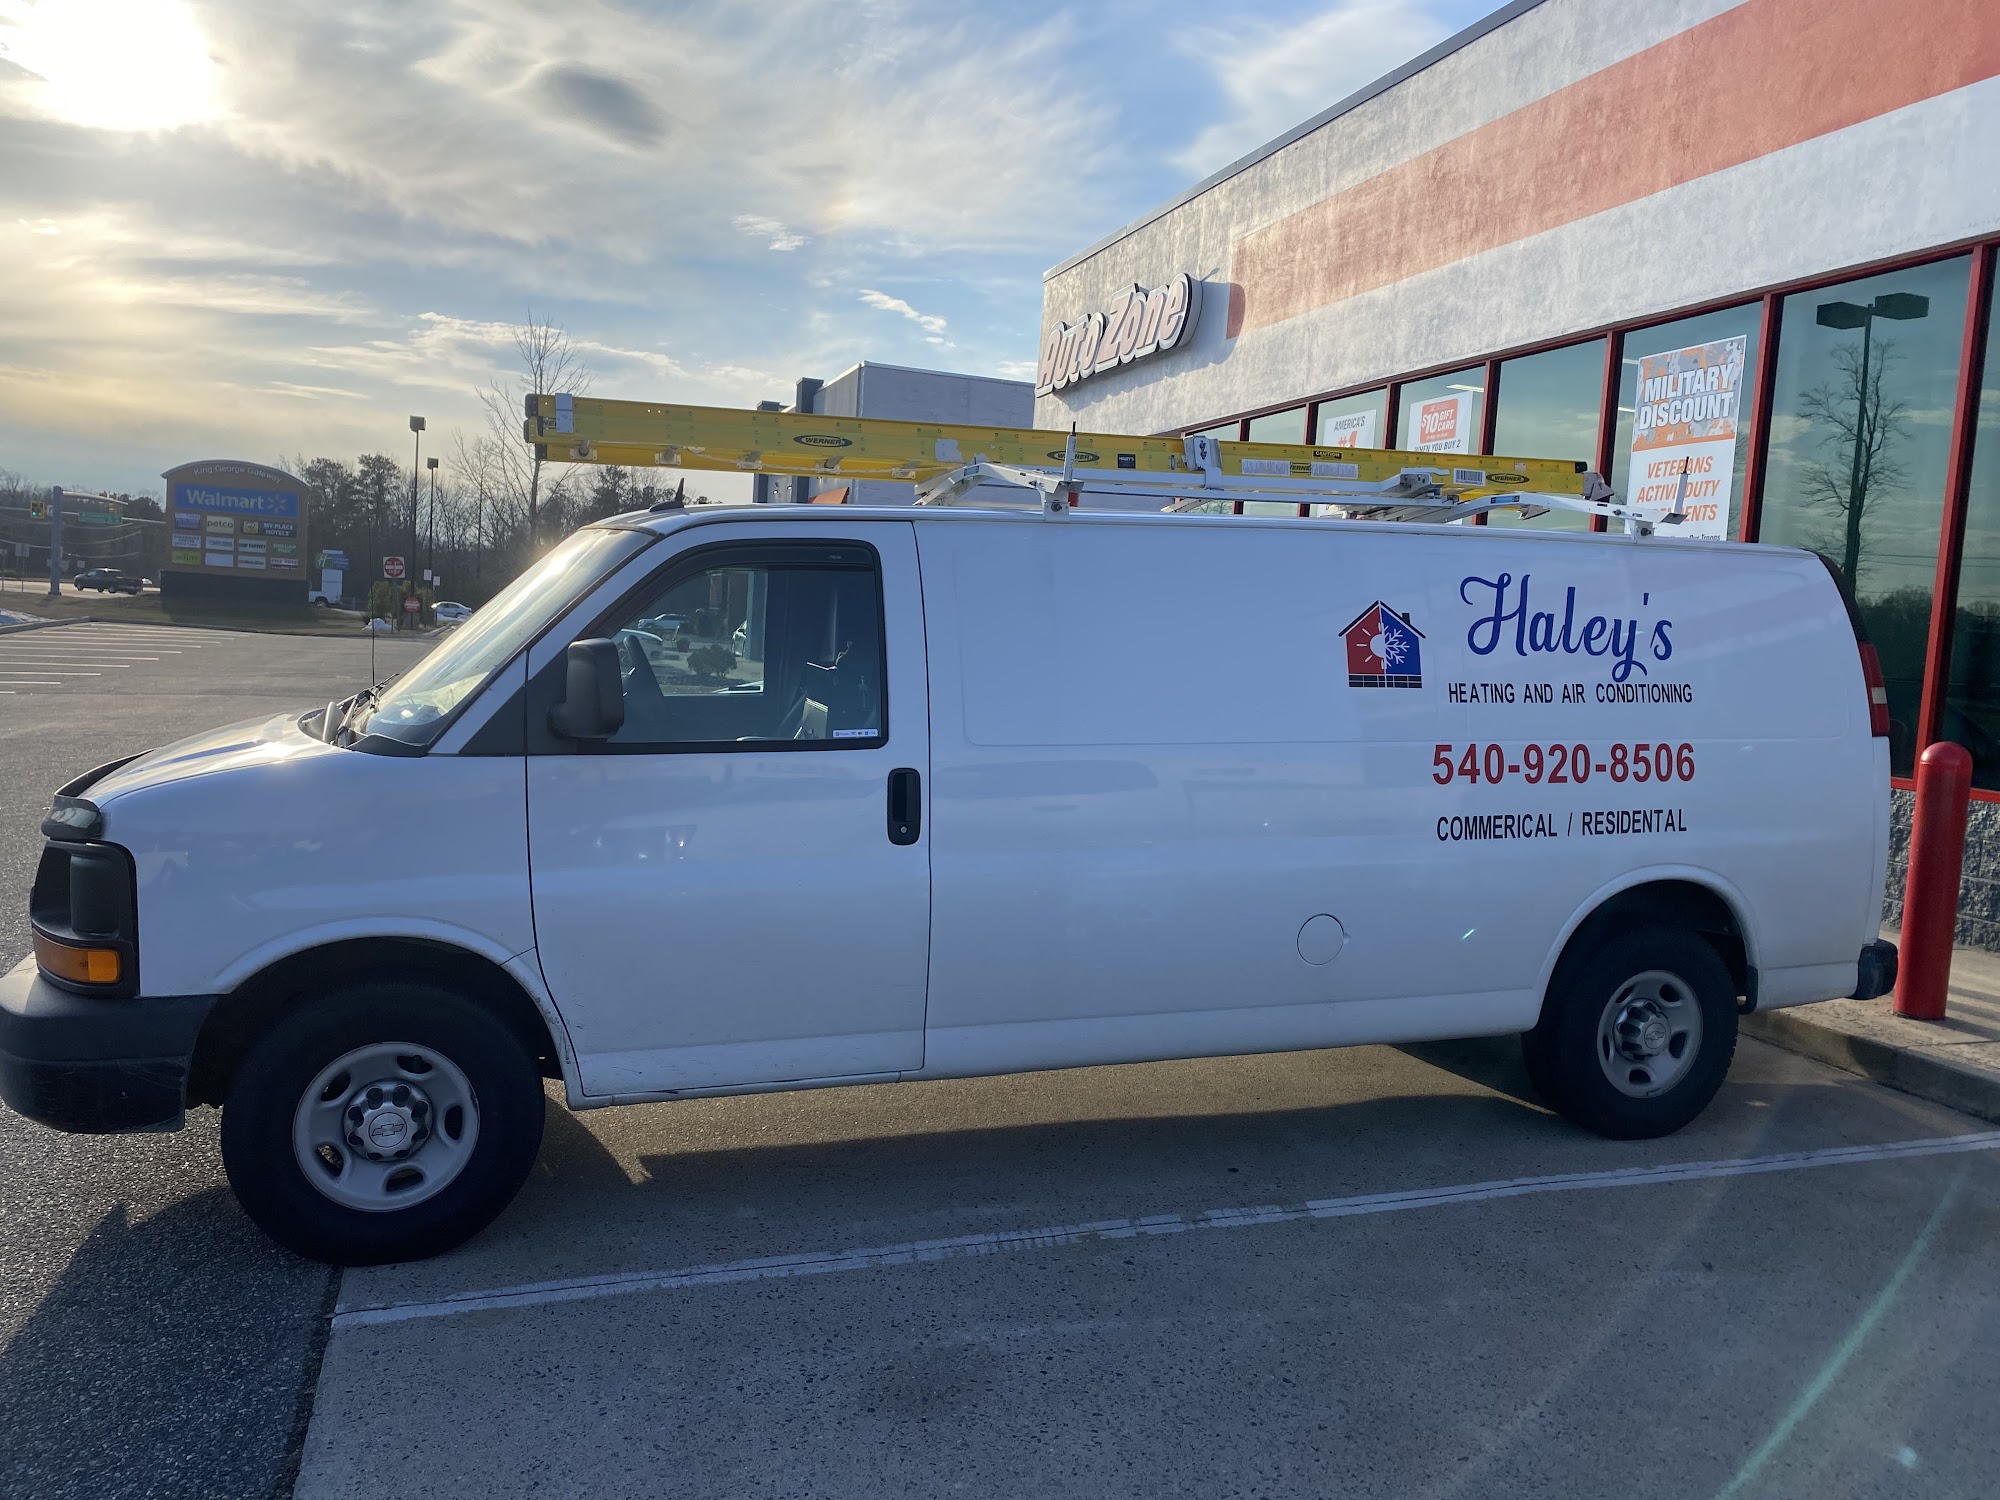 Haley’s Heating and Air Conditioning LLC